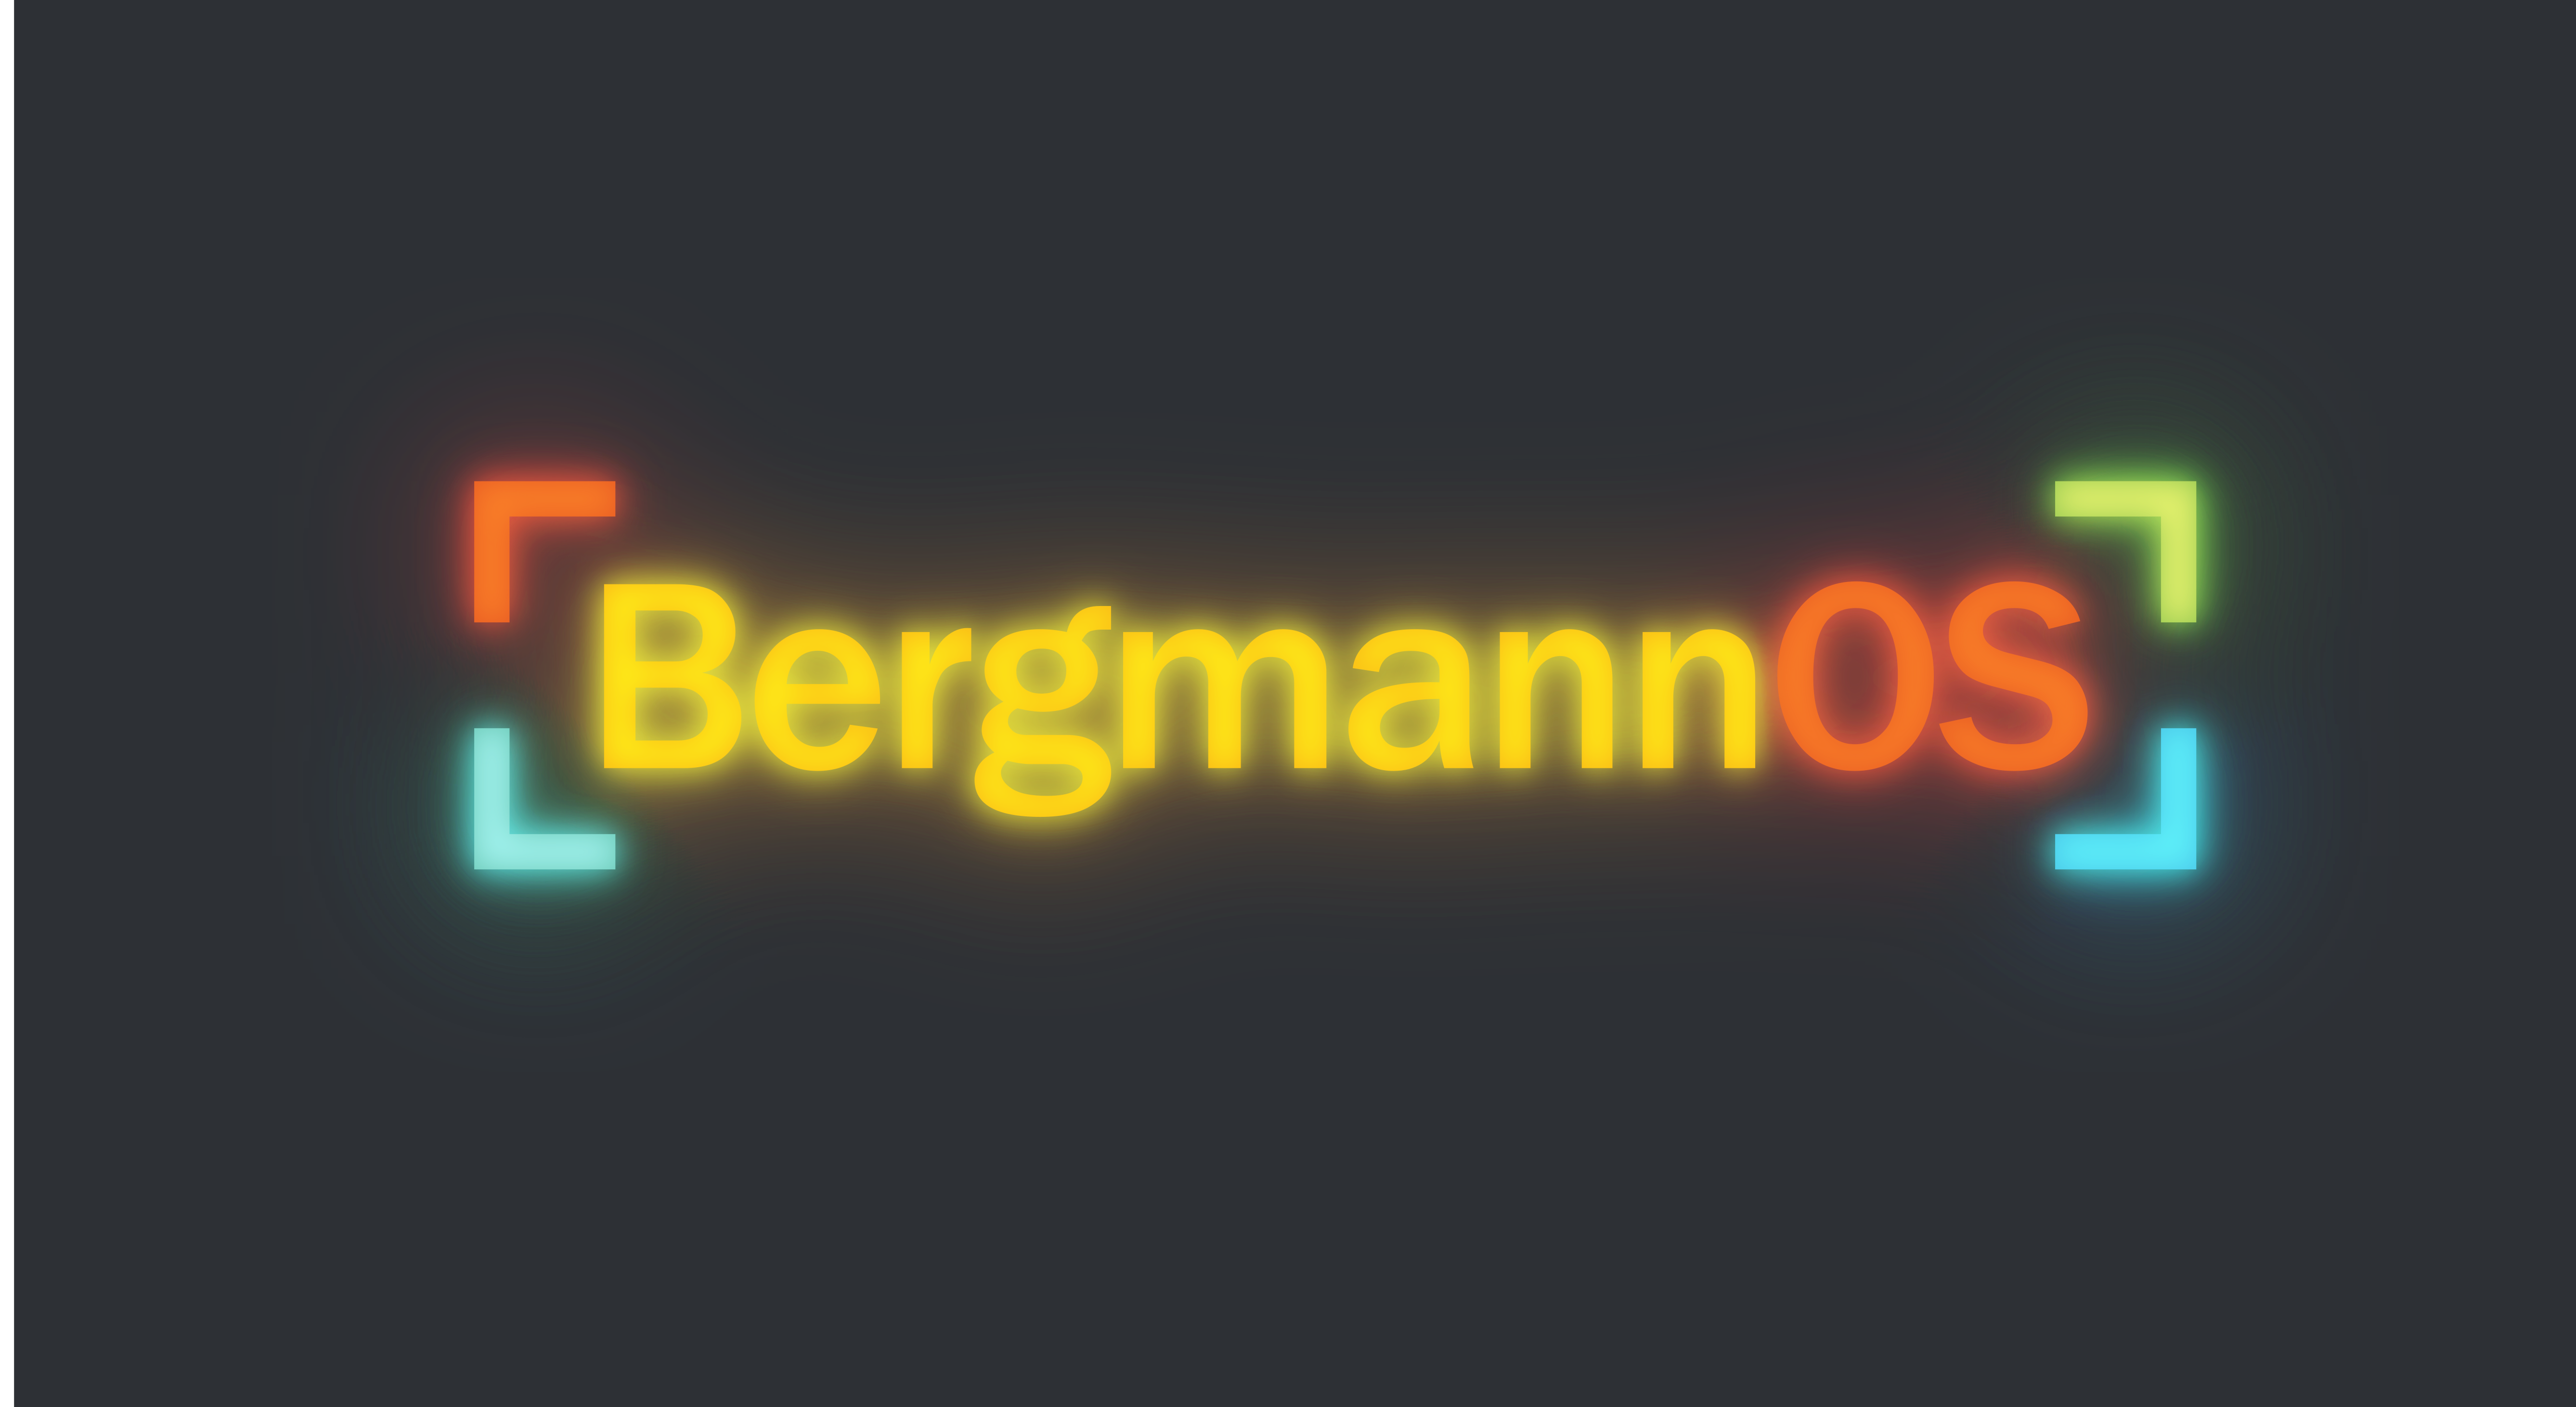 Bergmannos Linux-Based Os for Mining